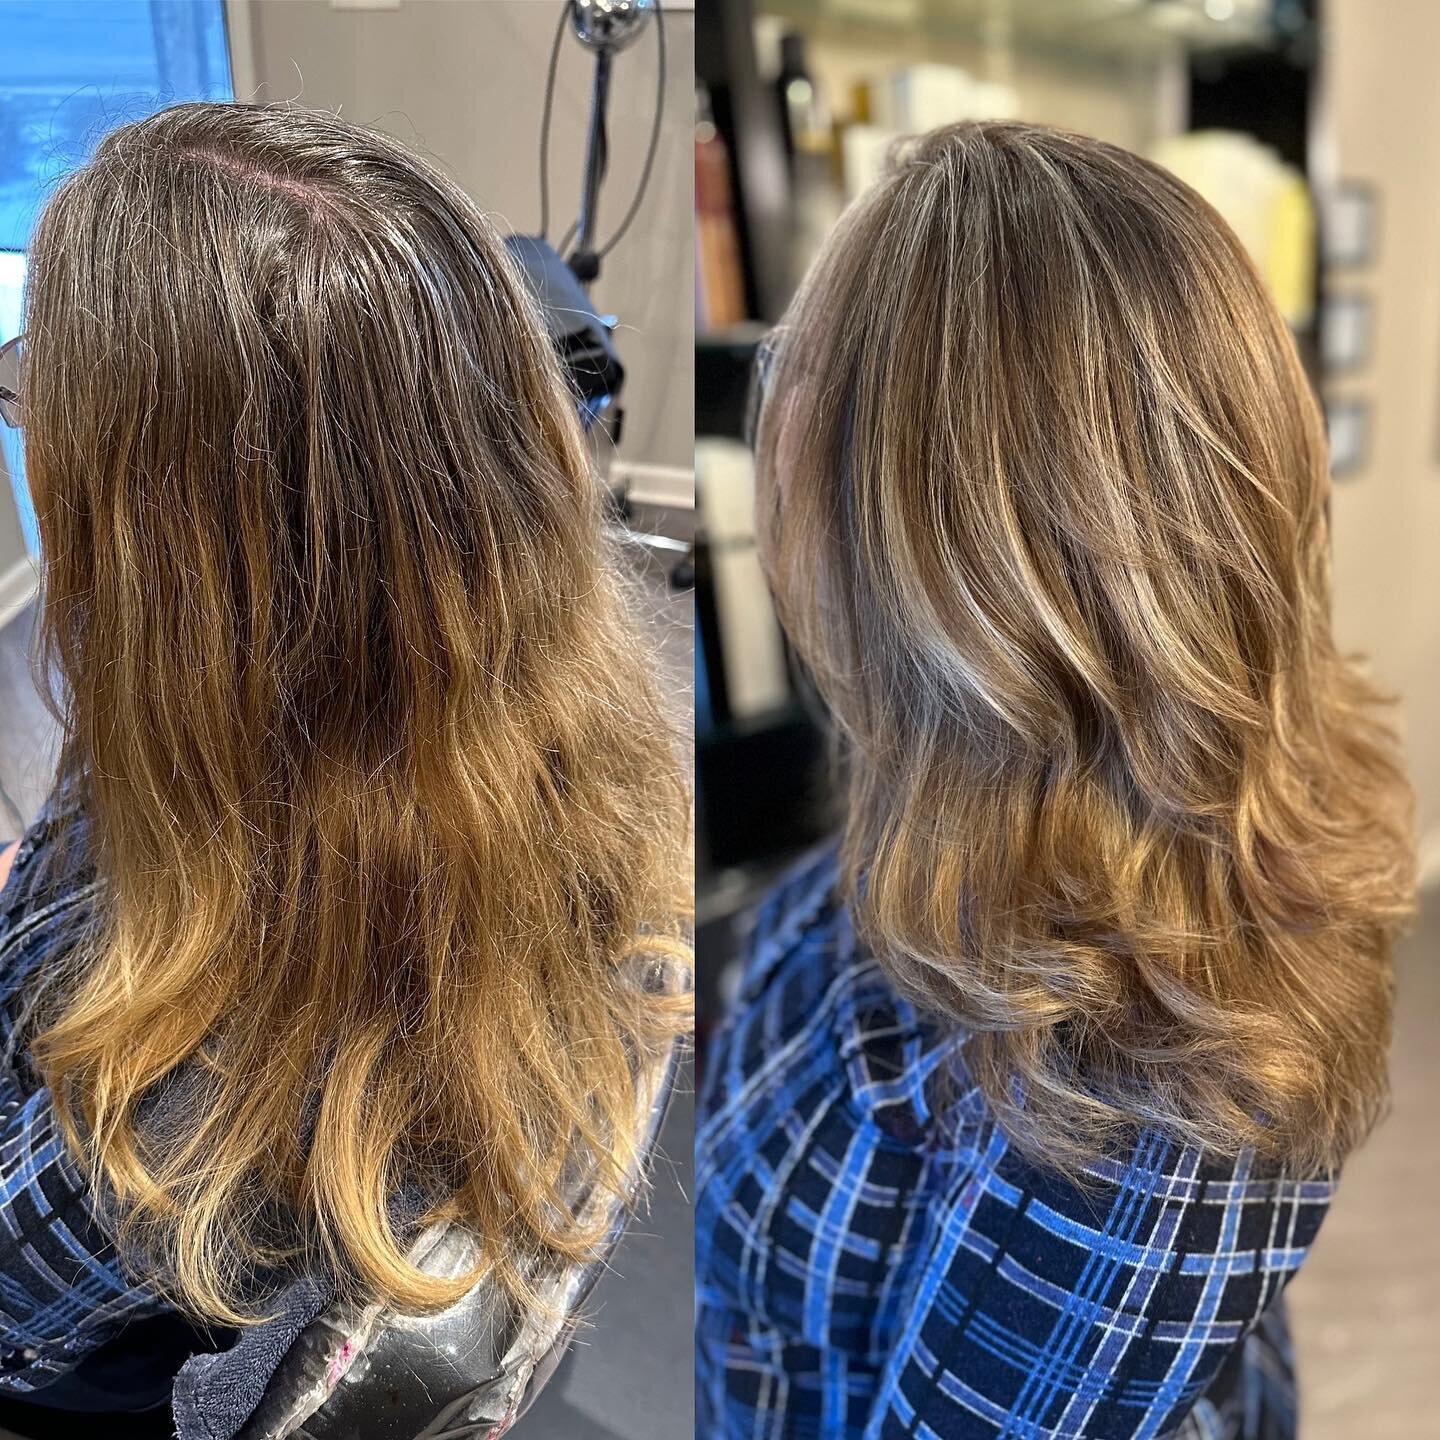 Ashley had the pleasure of meeting and styling our Merry Makeover winner this week! 🎁

Deborah is a busy mom of 4 with very little time for herself. With unwanted brassy tones in her ends and a harsh regrowth line we decided on a color correction us